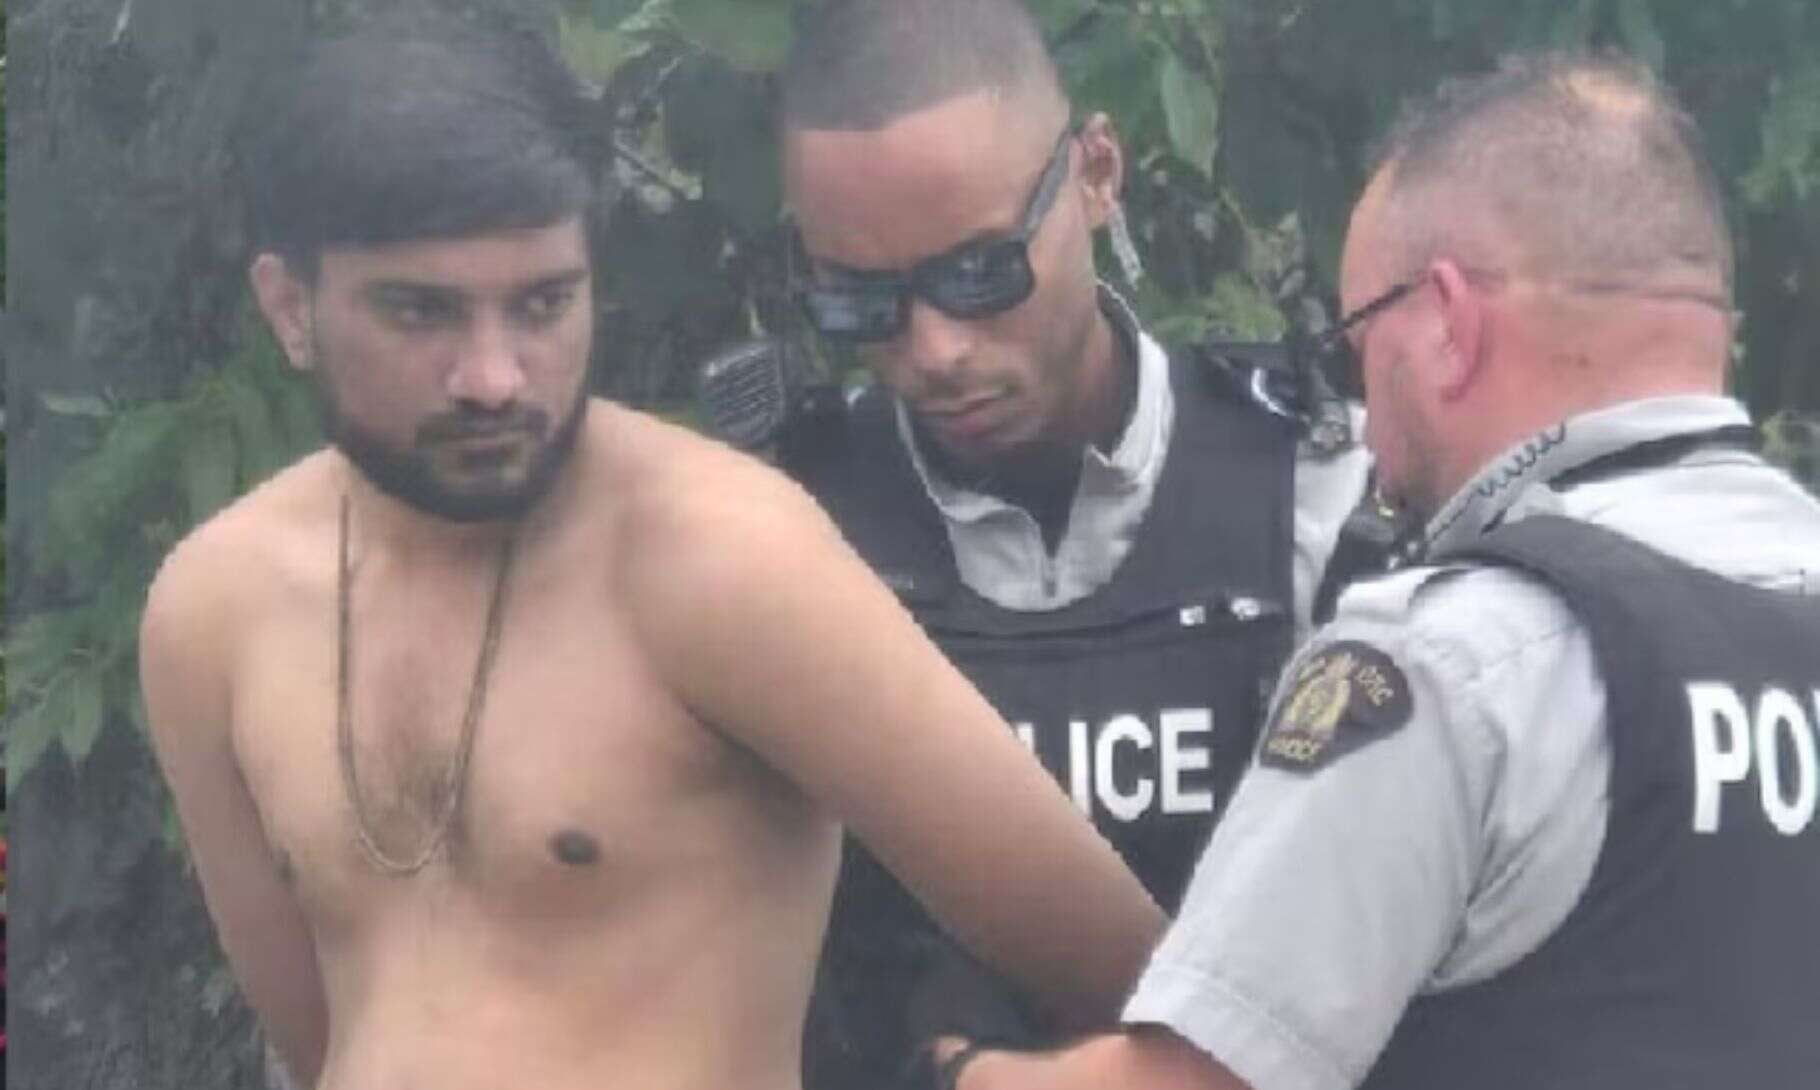 Indian National Arrested In Canada For Alleged Groping At Waterpark